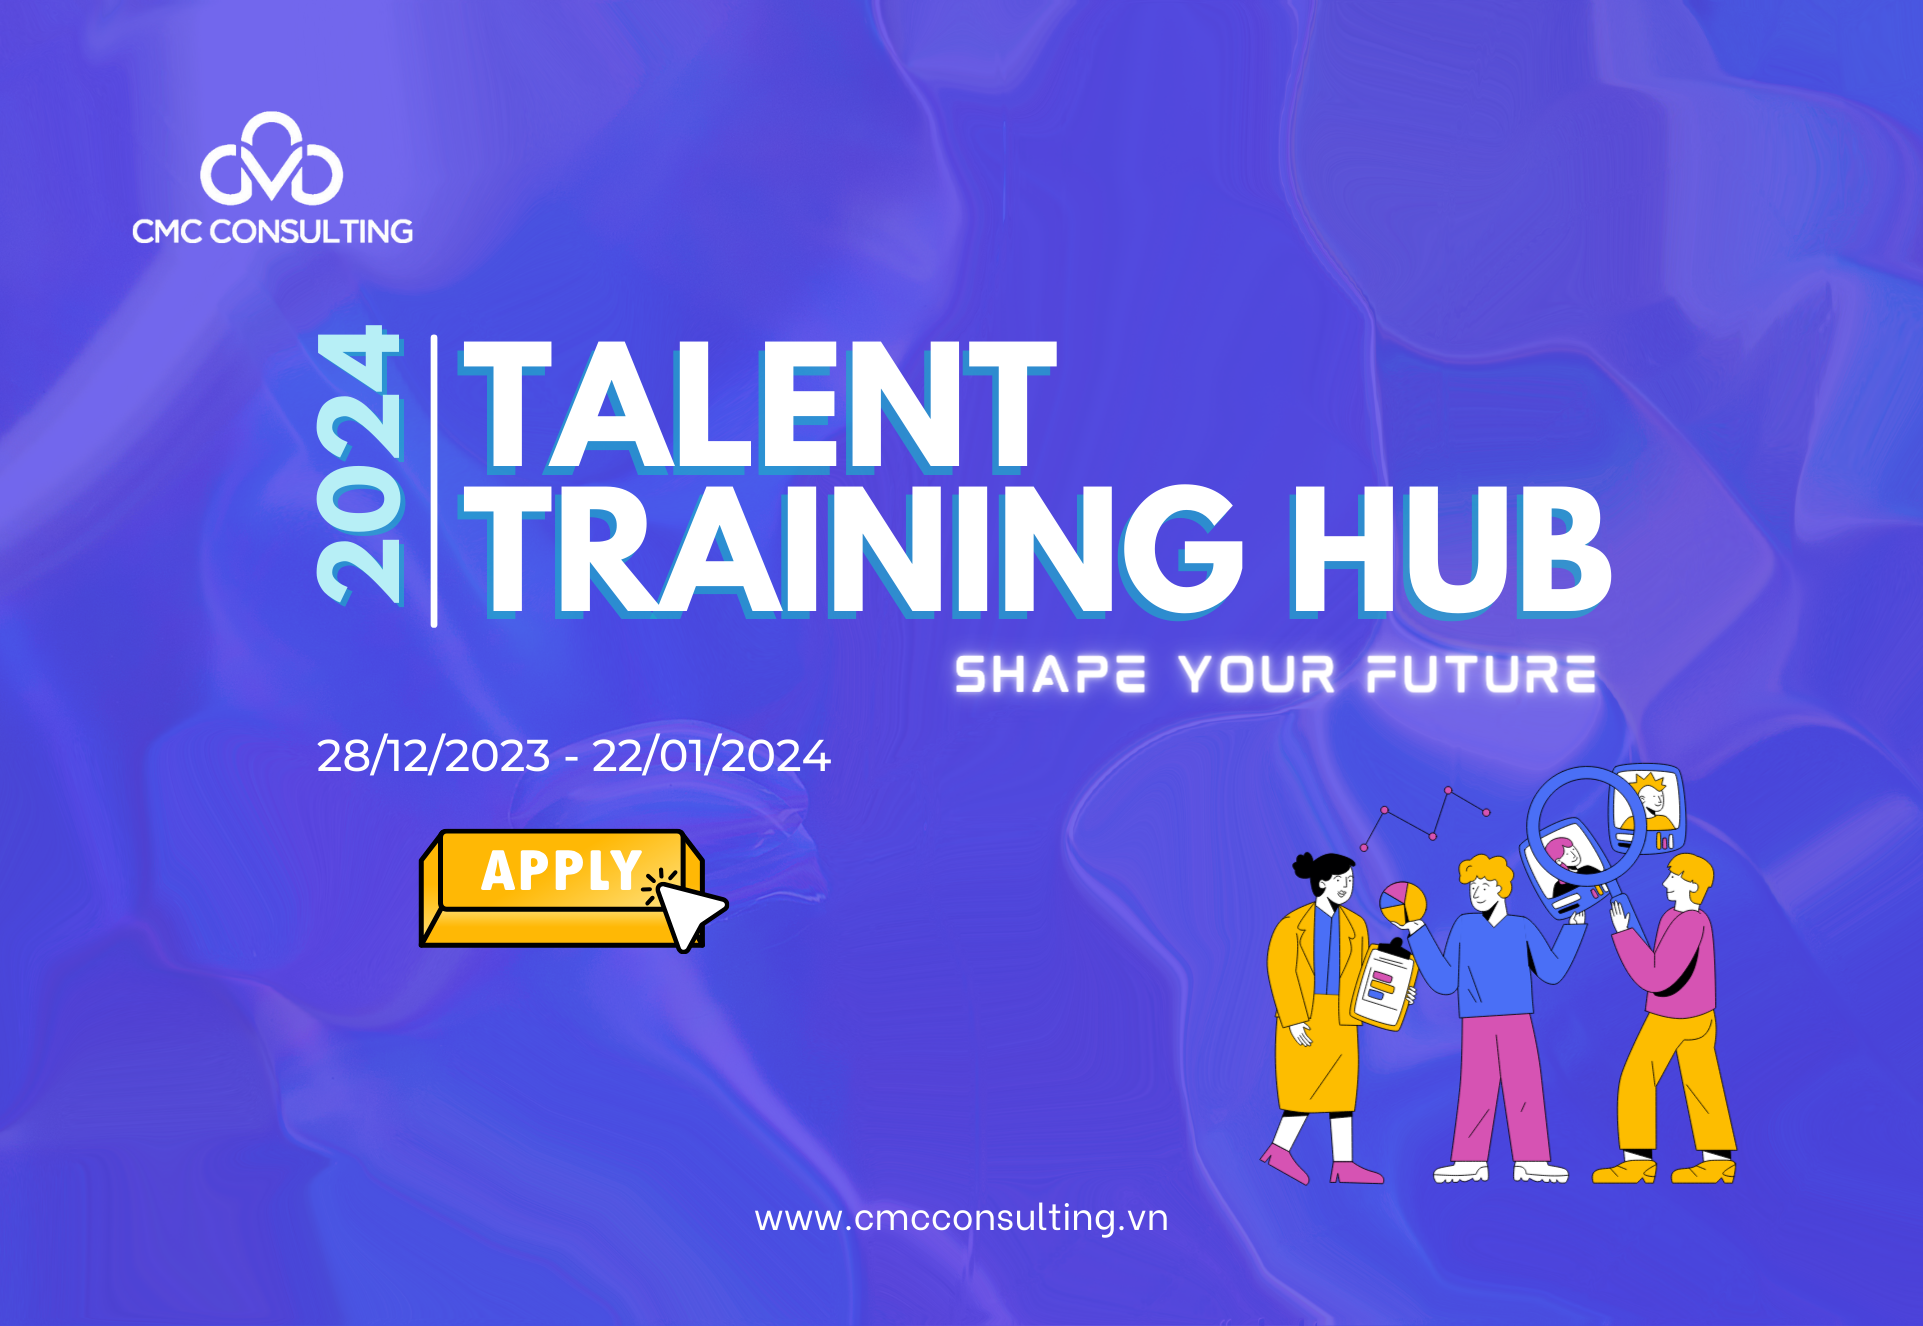 CMC CONSULTING TALENT TRAINING HUB 2024 - Shape Your Future